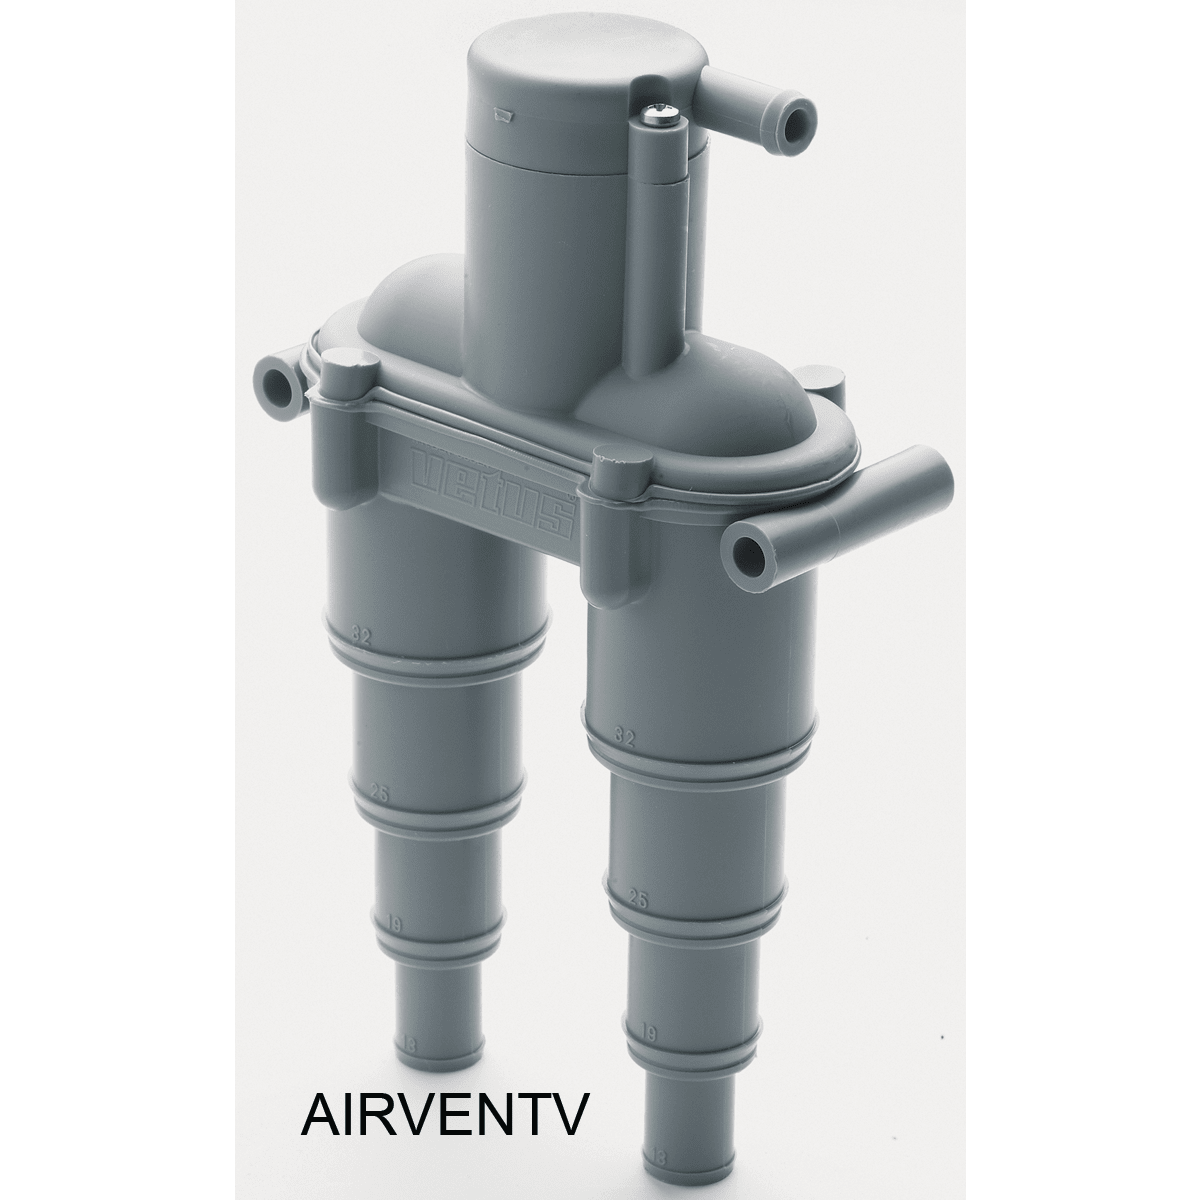 AIR VENT WITH VALVE